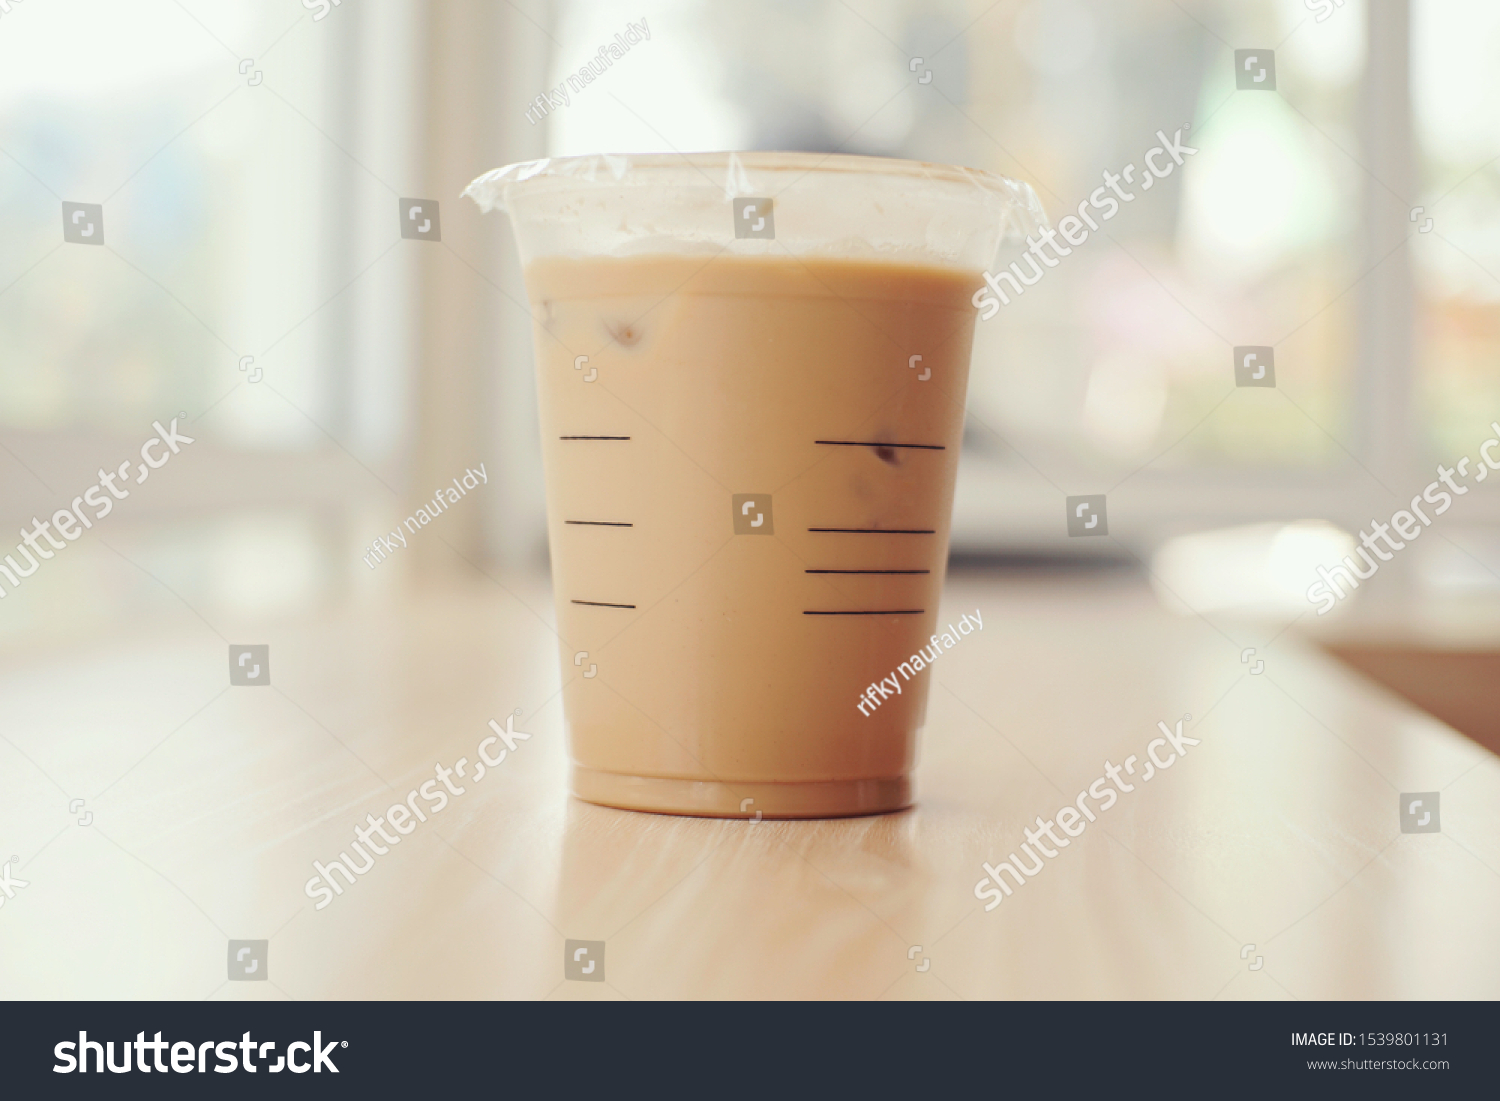 Download Mockup Iced Coffee Milk Plastic Cup Stock Photo Edit Now 1539801131